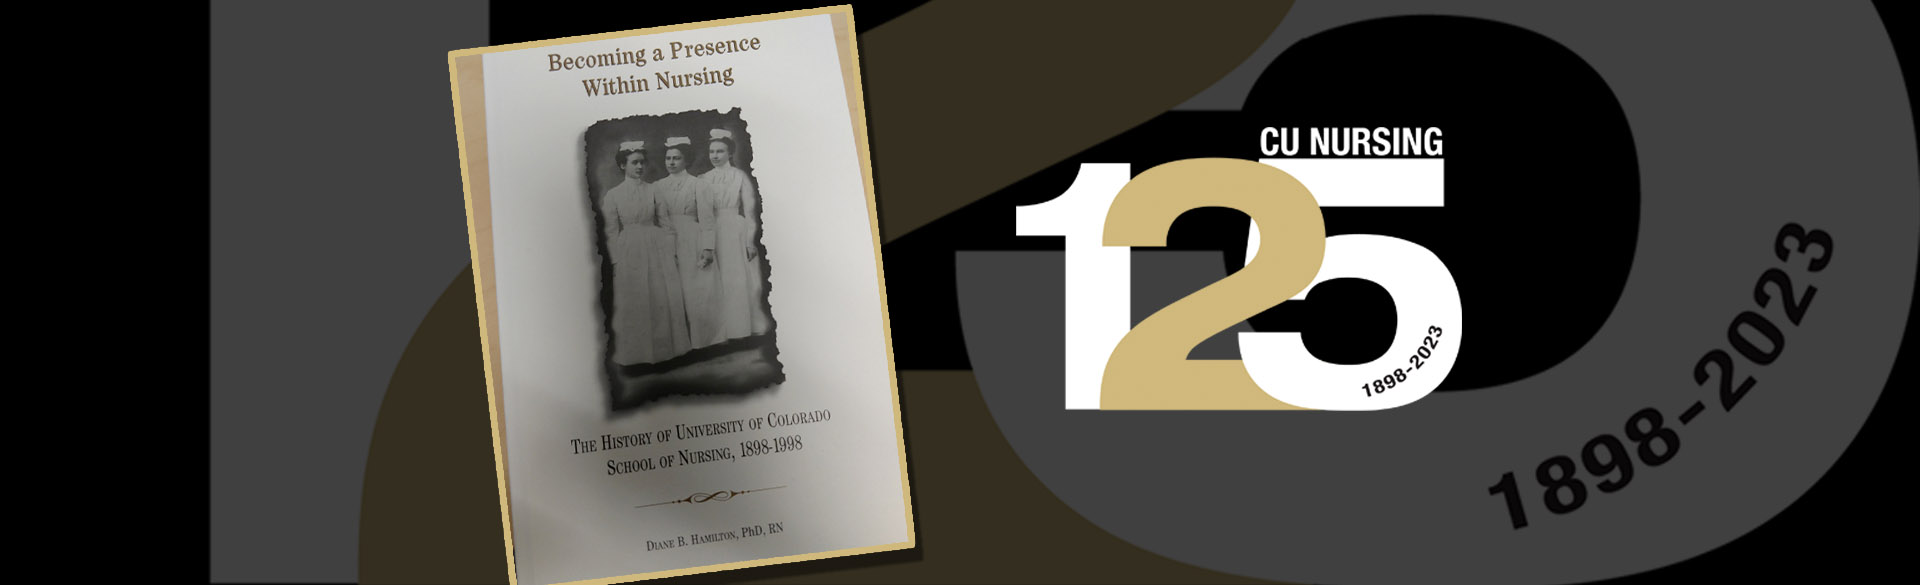 Becoming a Presence Within Nursing: The History of University of Colorado School of Nursing, 1898-1998